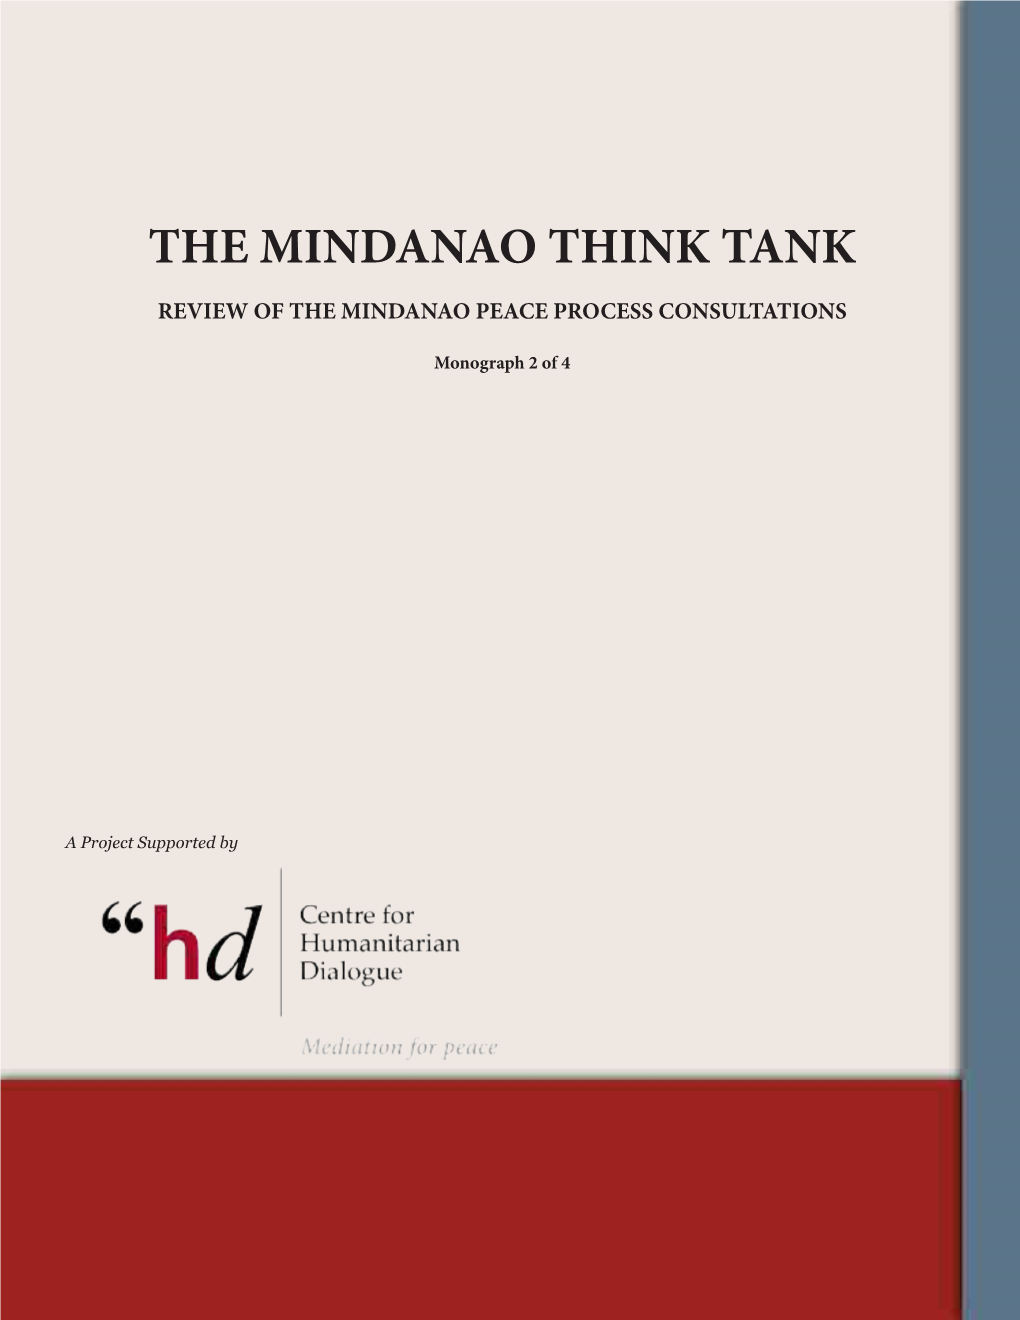 The Mindanao Think Tank Review of the Mindanao Peace Process Consultations